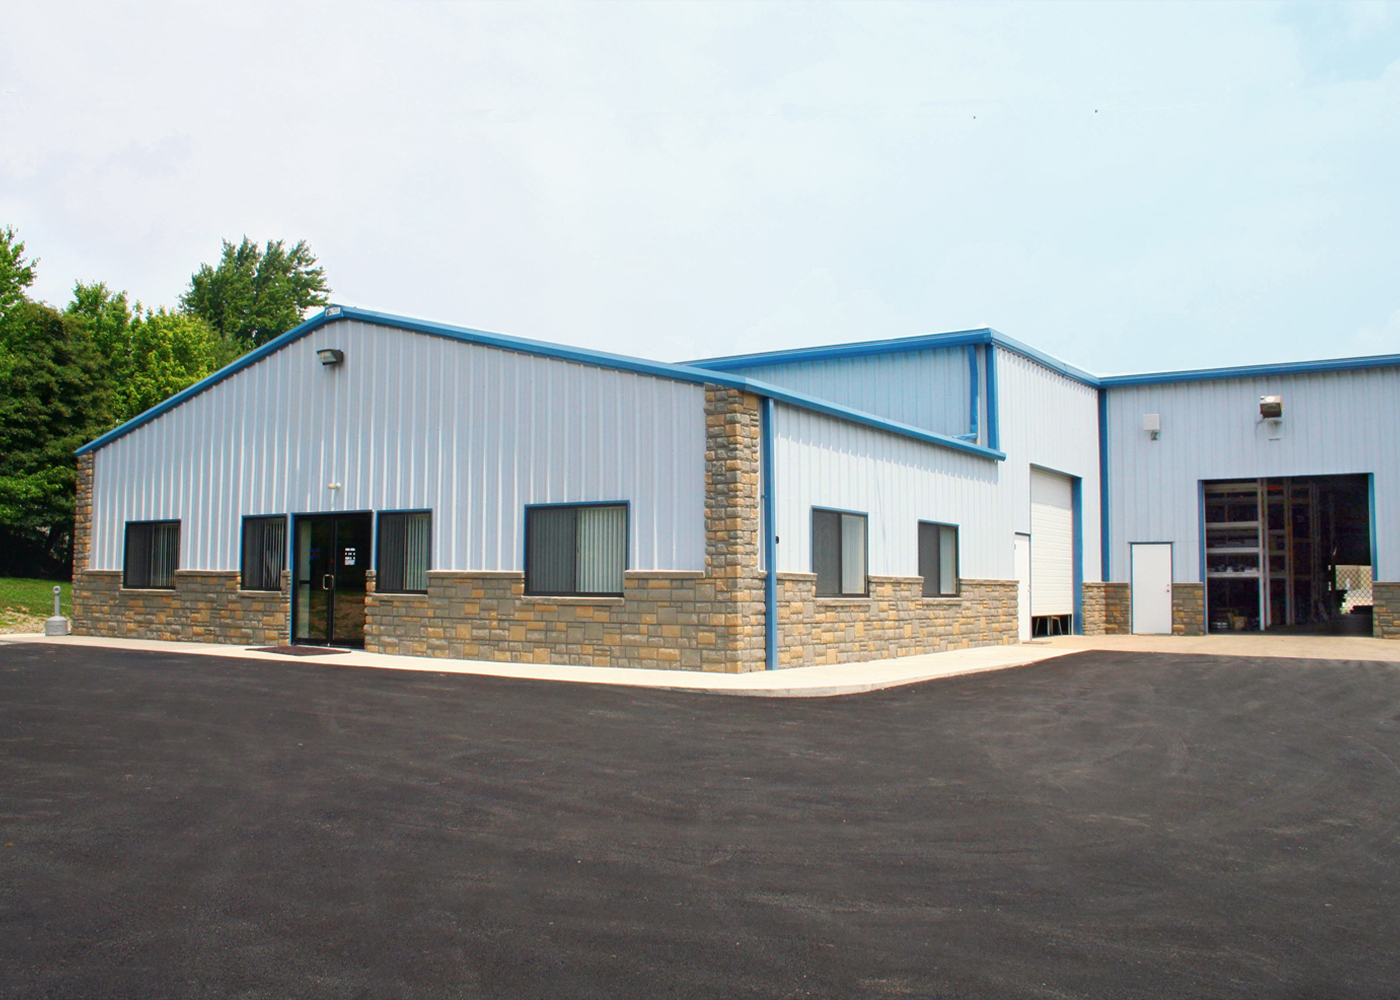 Capital Steel Auto Shop Building with GenStone